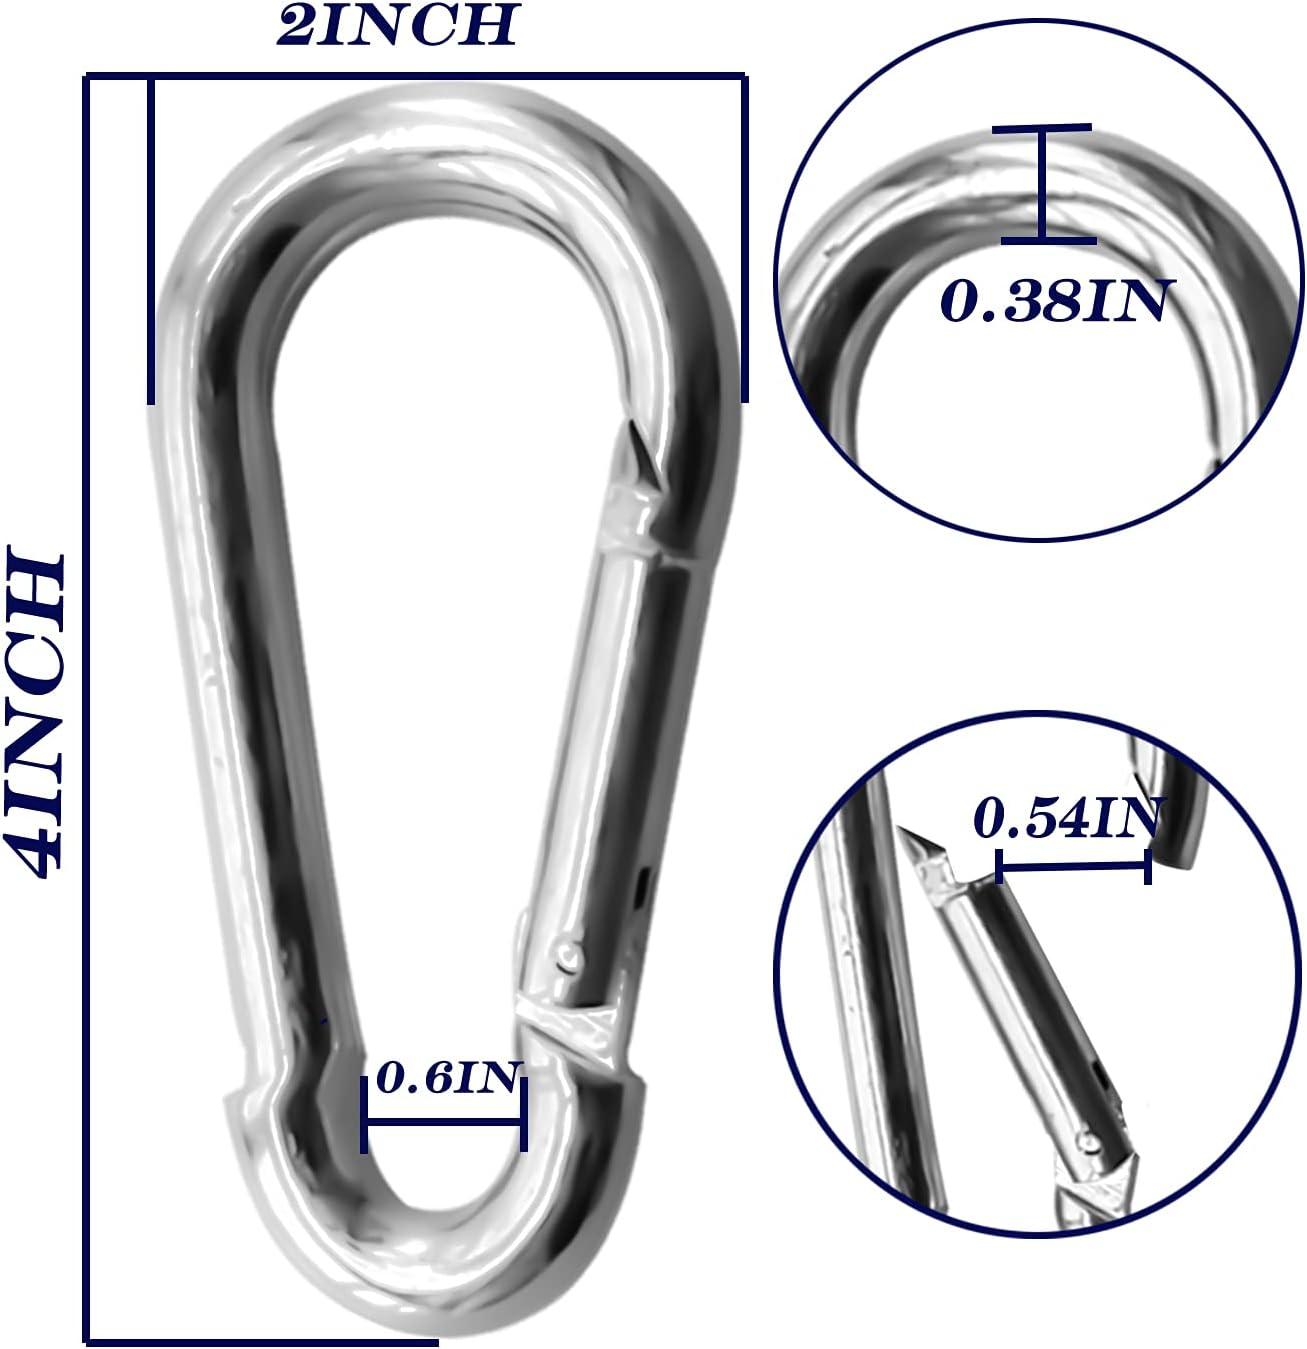 30Pack Heavy Duty Spring Snap Hooks 4Inch, 3/8 Carabiner Clips for Swing,  Large Steel Chain Quick Links Safety Buckle Connector for Hammock Fitness  Gym Outdoor Boating, M10 Snap Hook Carabiners